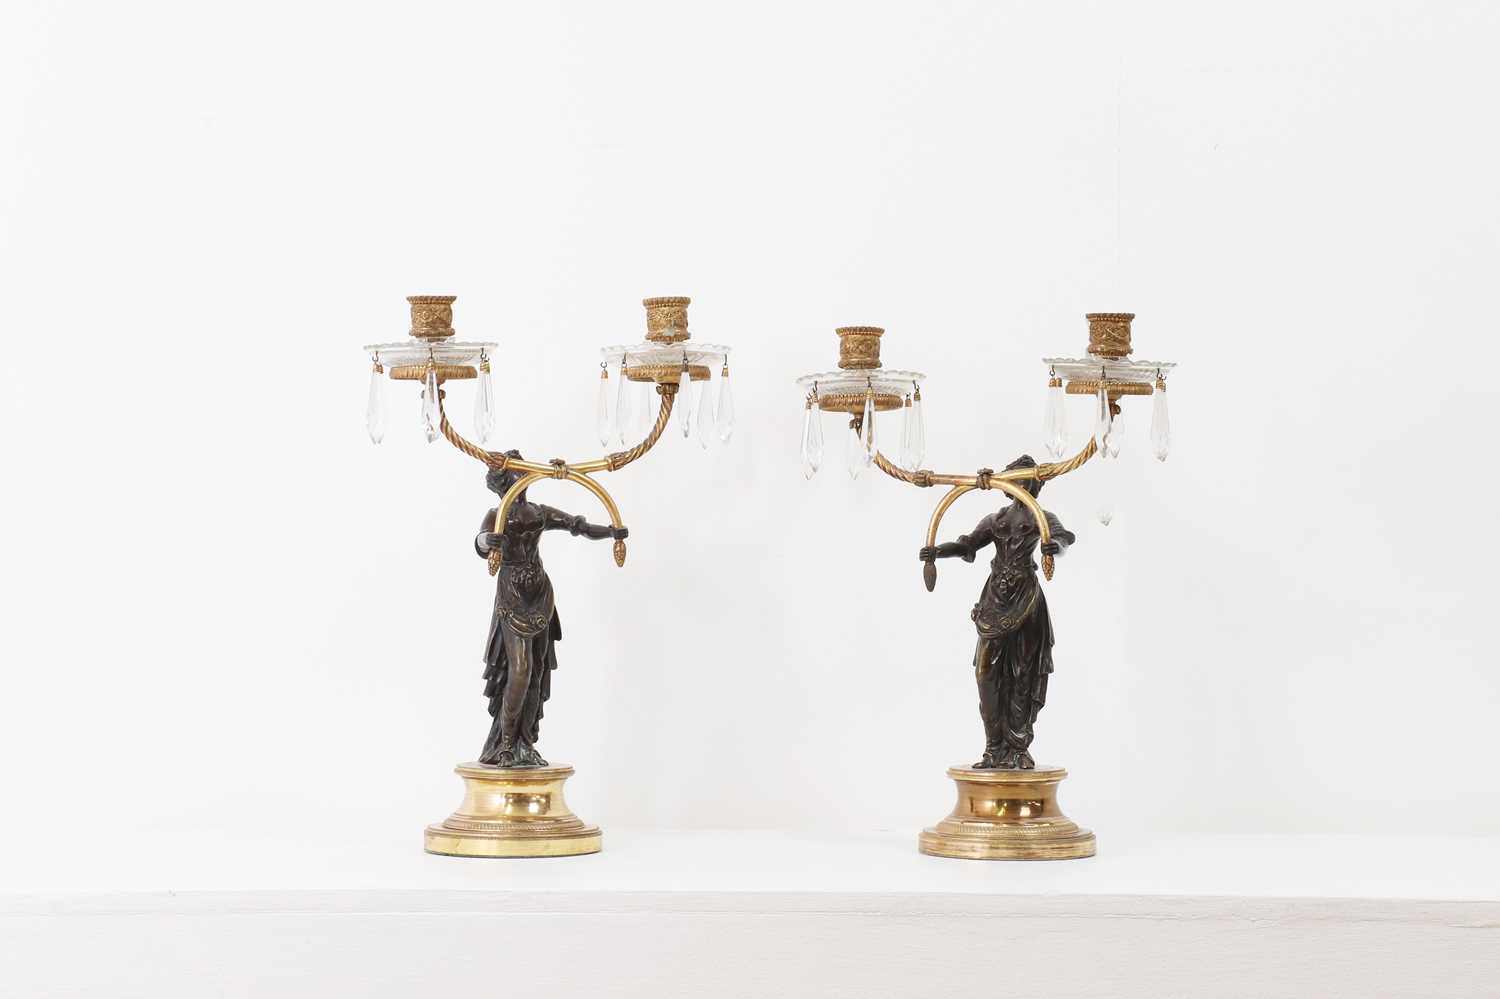 Lot 31 - A pair of Empire-style gilt and patinated bronze candelabra